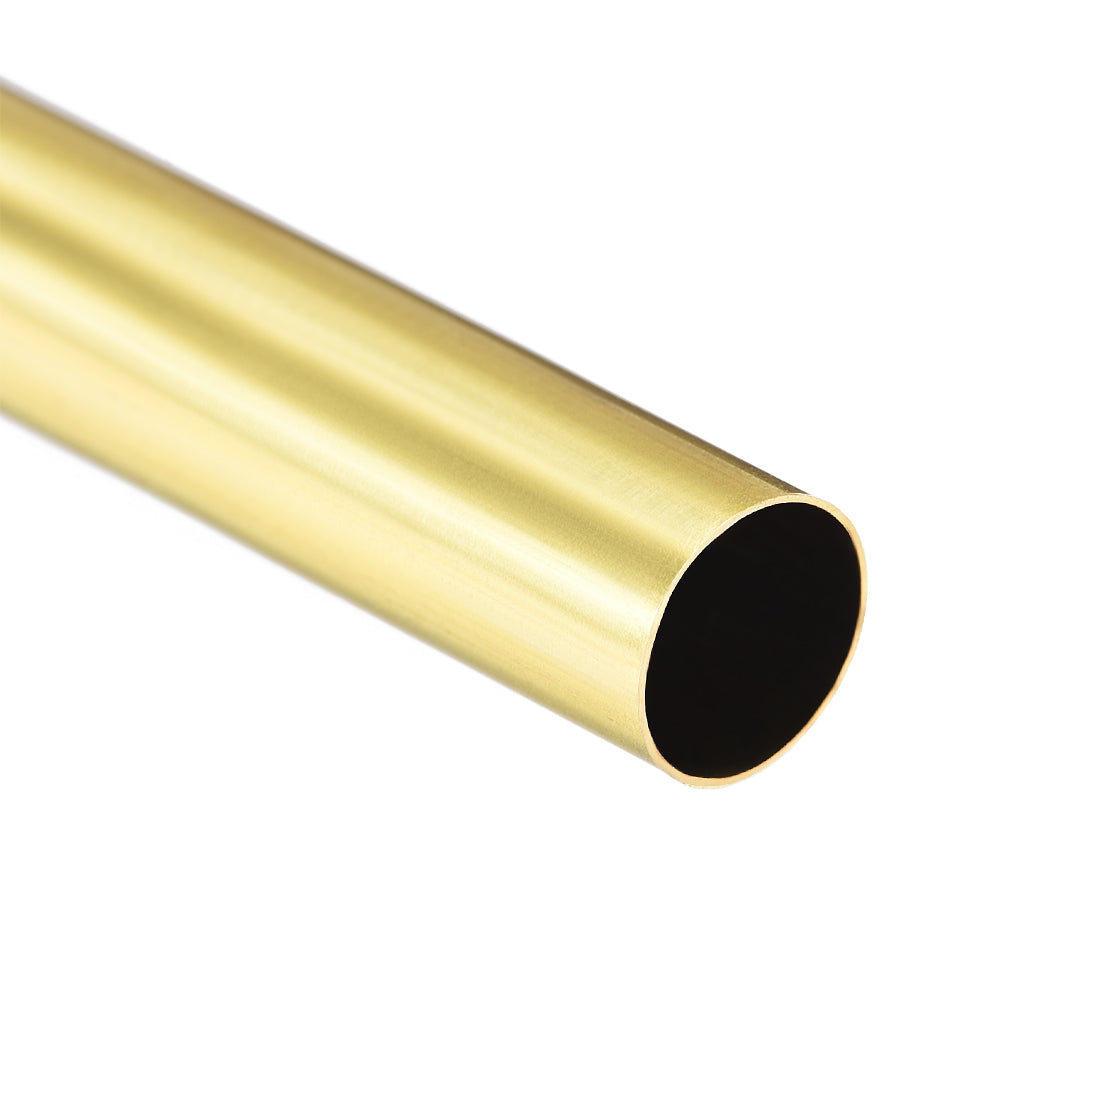 Uxcell Uxcell Brass Round Tube 300mm Length 7mm OD 0.2mm Wall Thickness Seamless Straight Pipe Tubing 4 Pcs